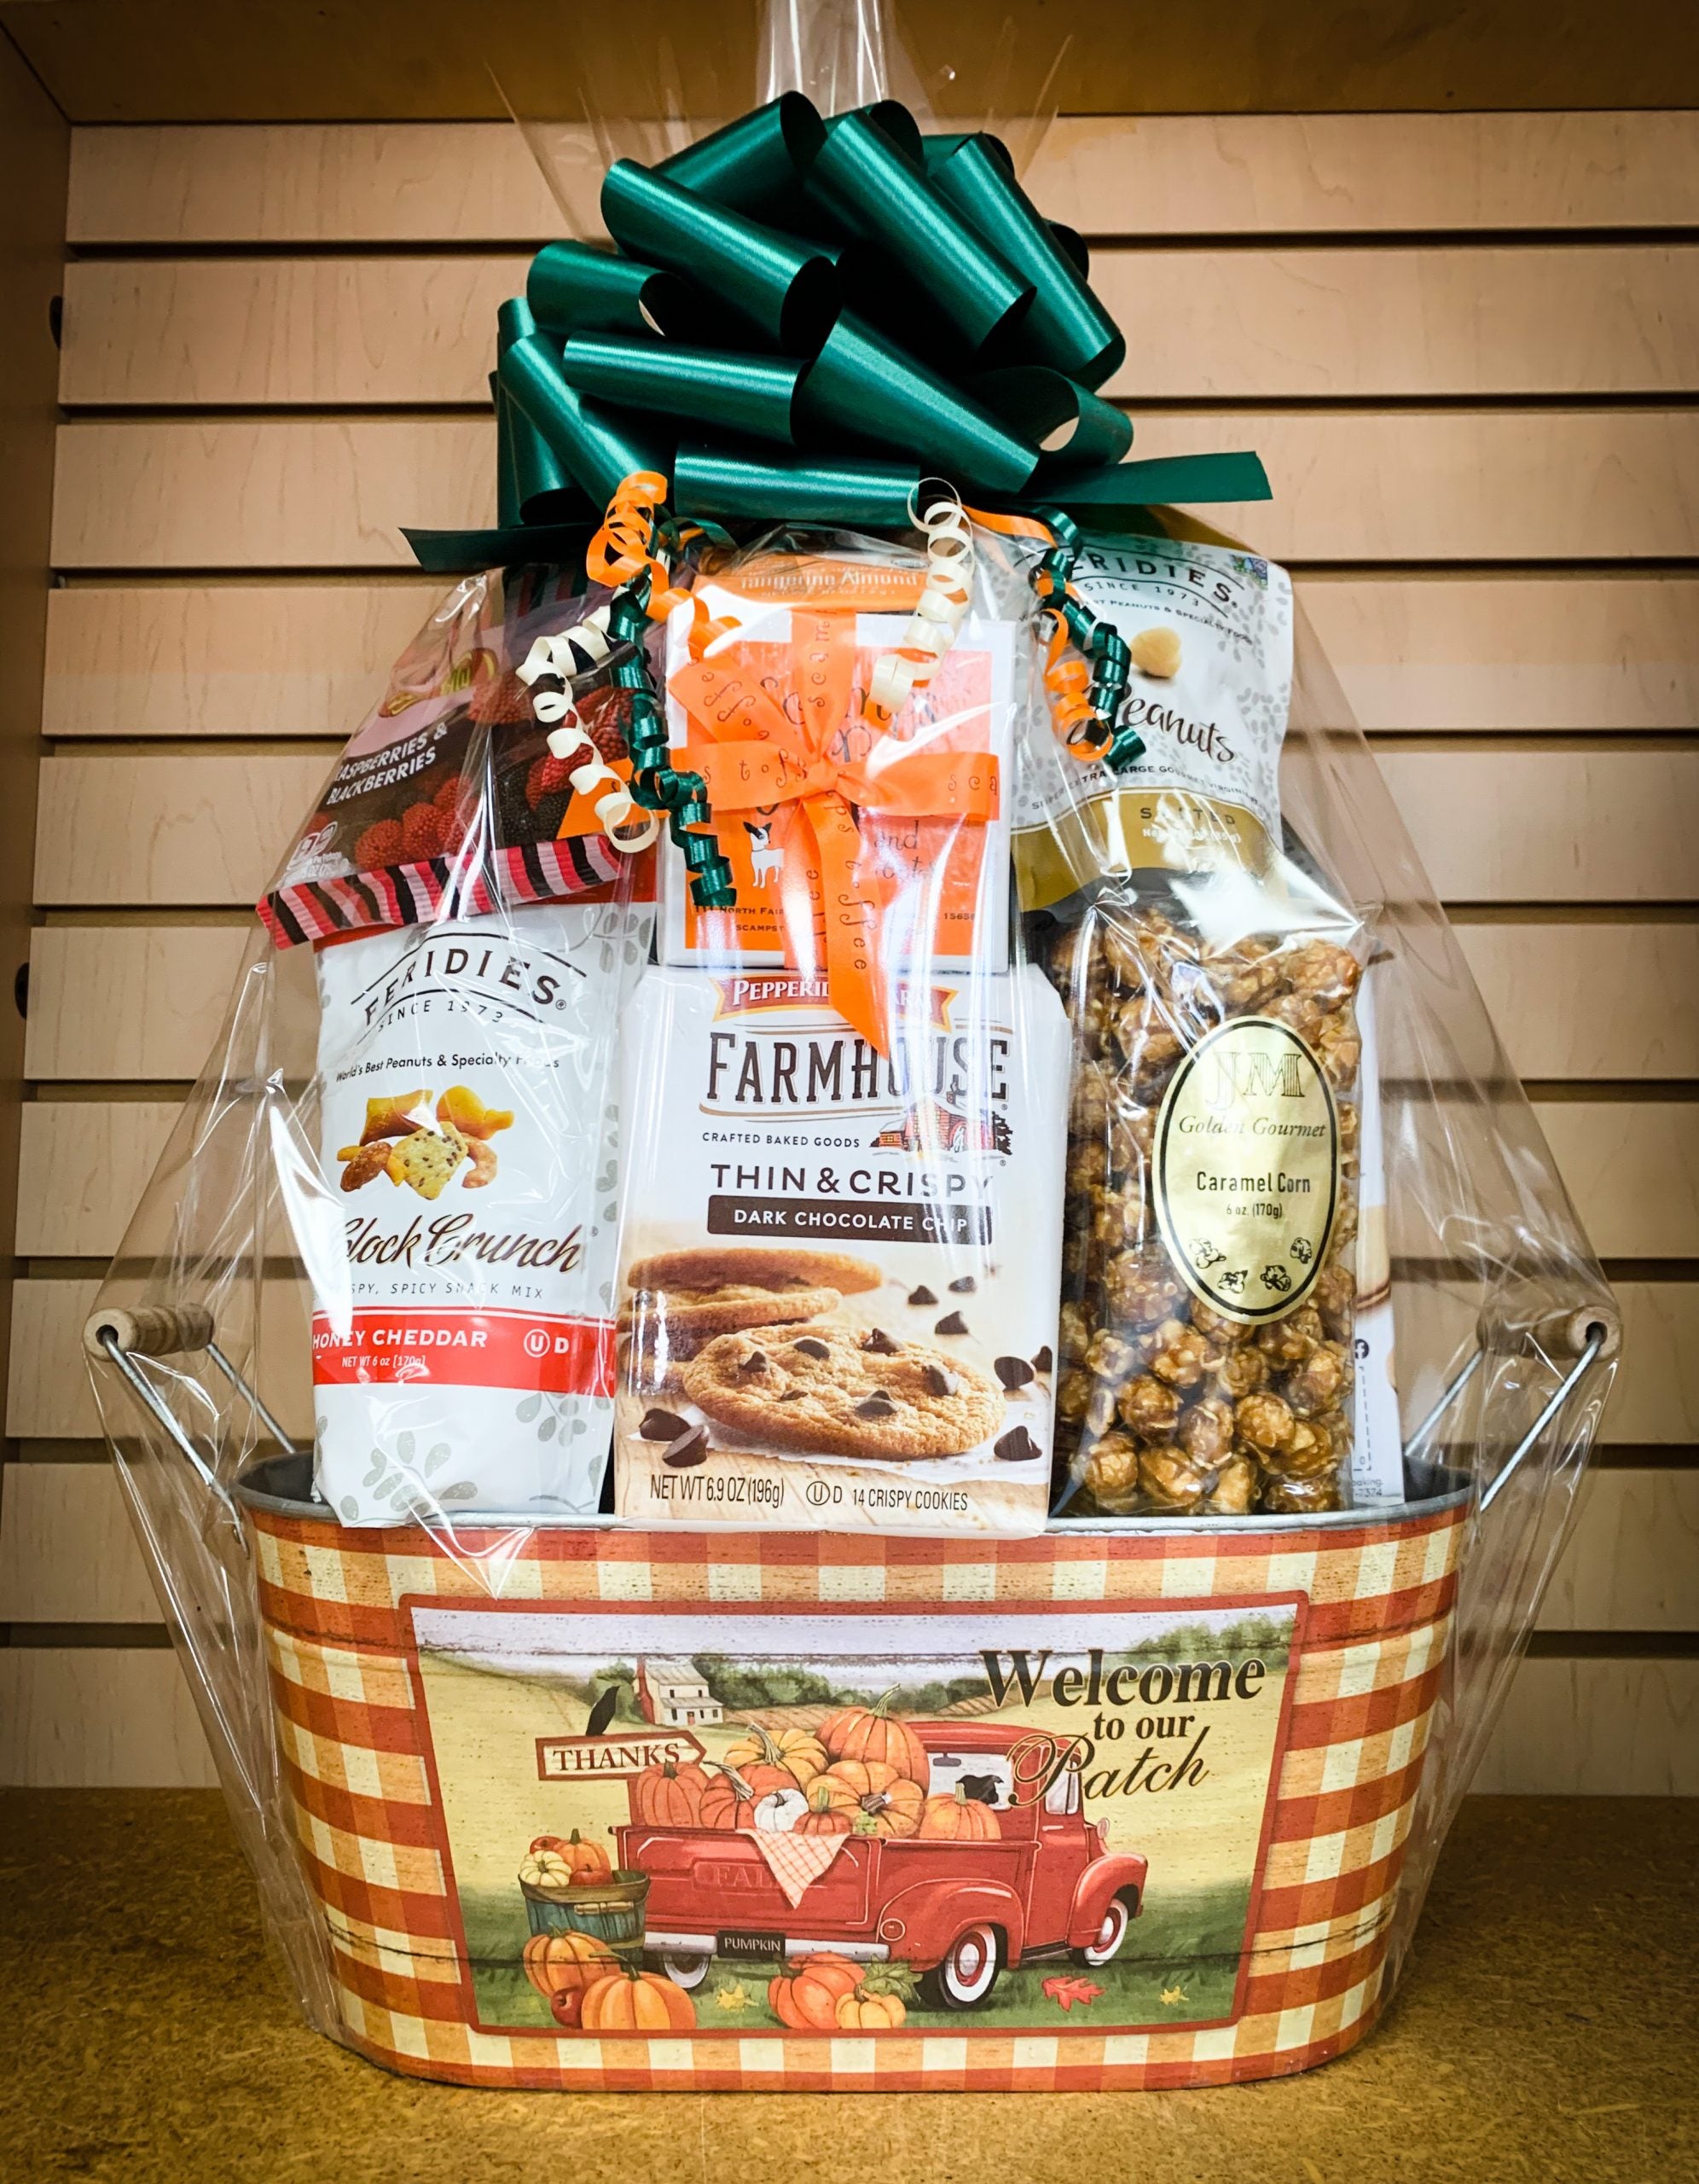 Welcome to our Patch Gift Basket